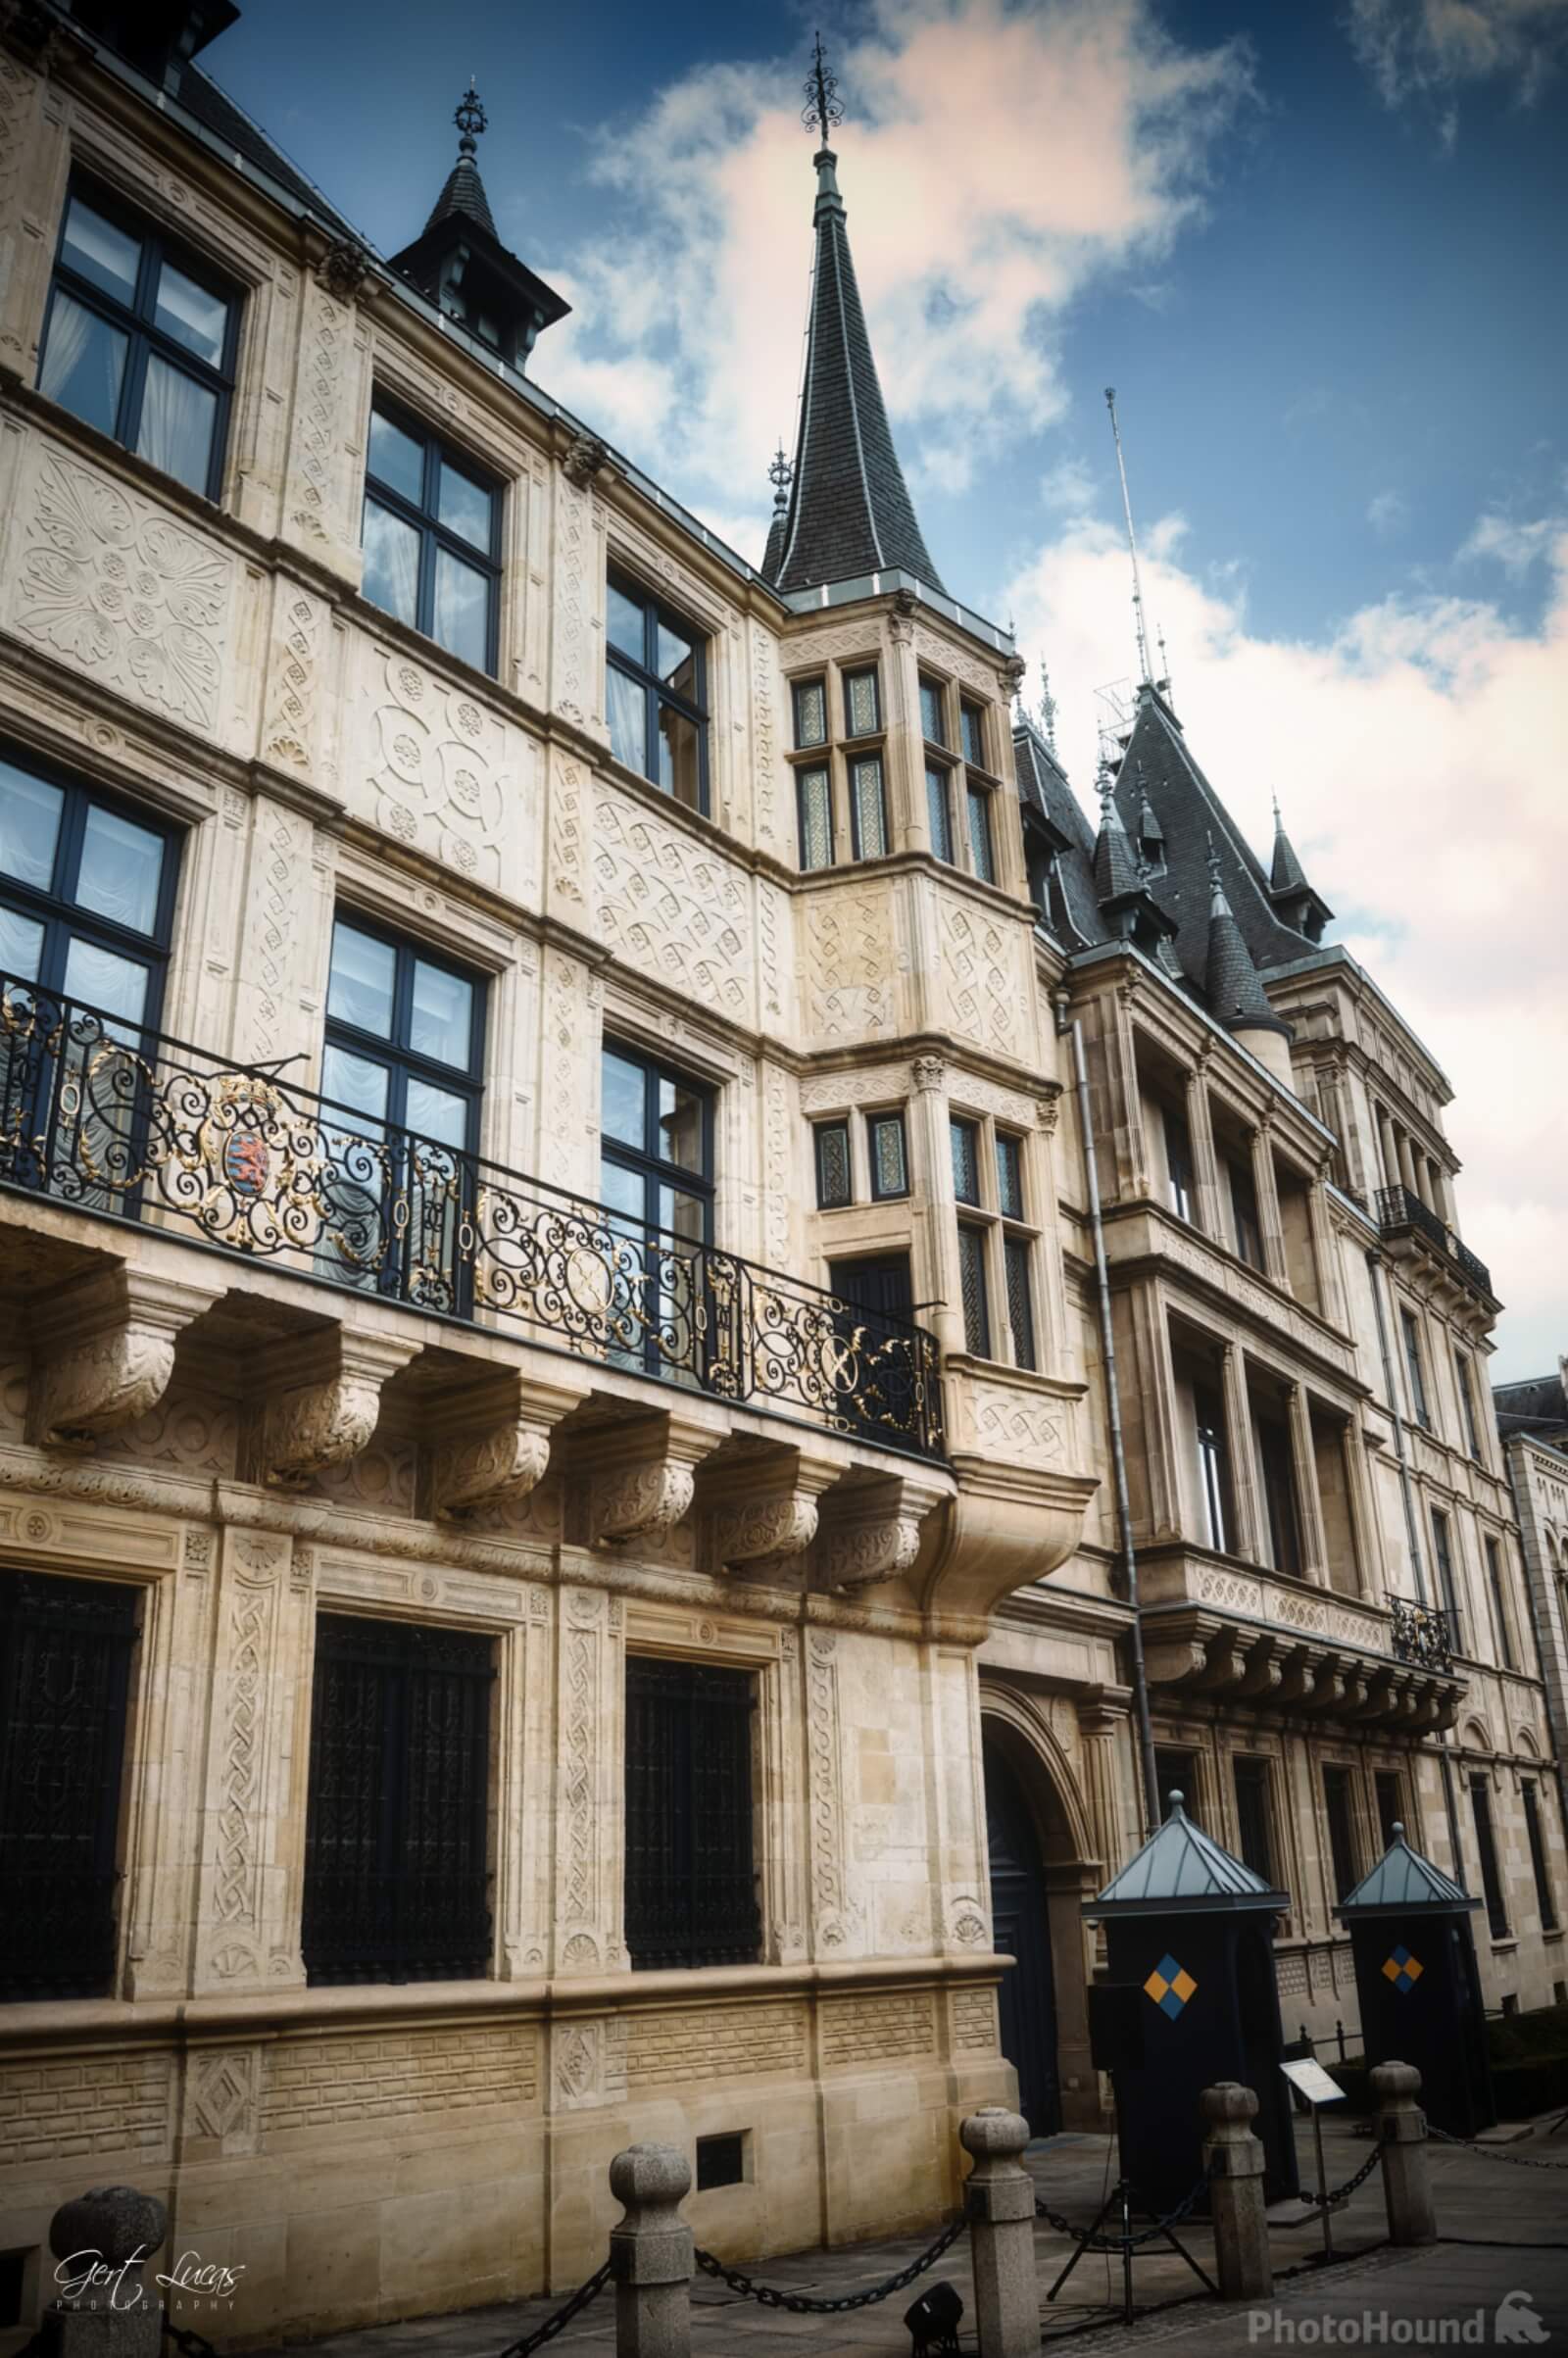 Image of Grand Ducal Palace by Gert Lucas